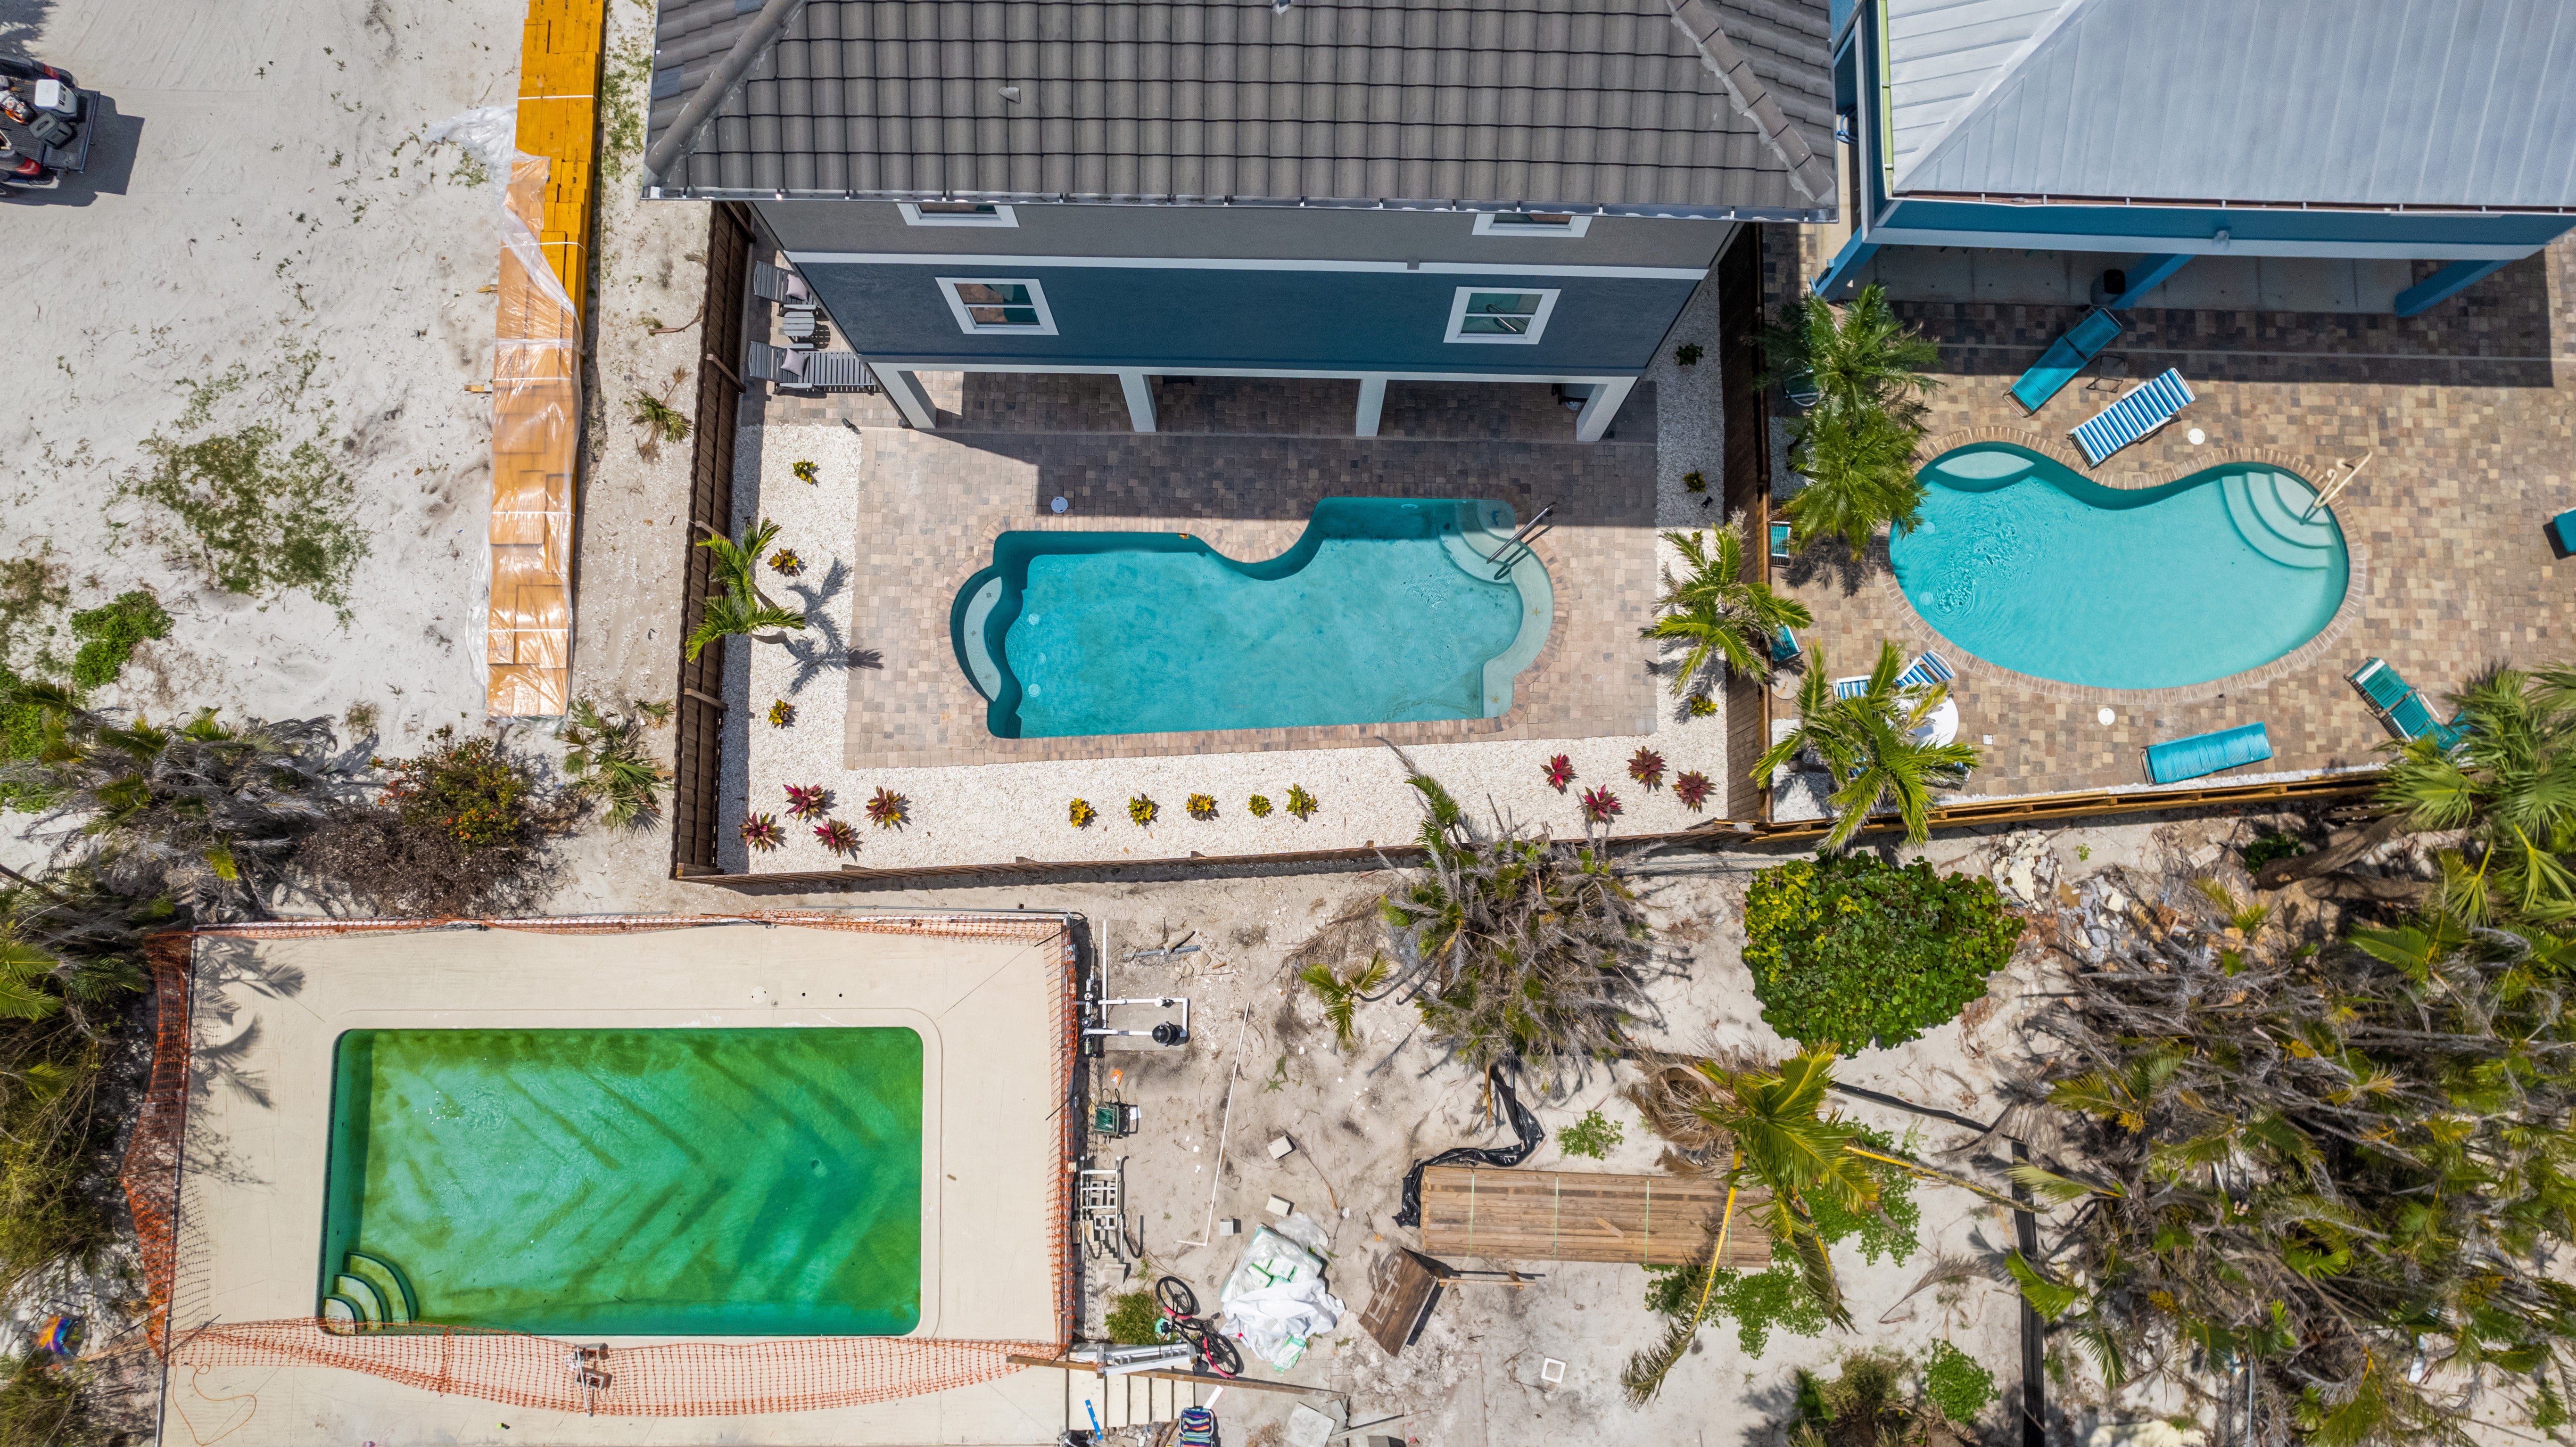 Aerial view of pool area